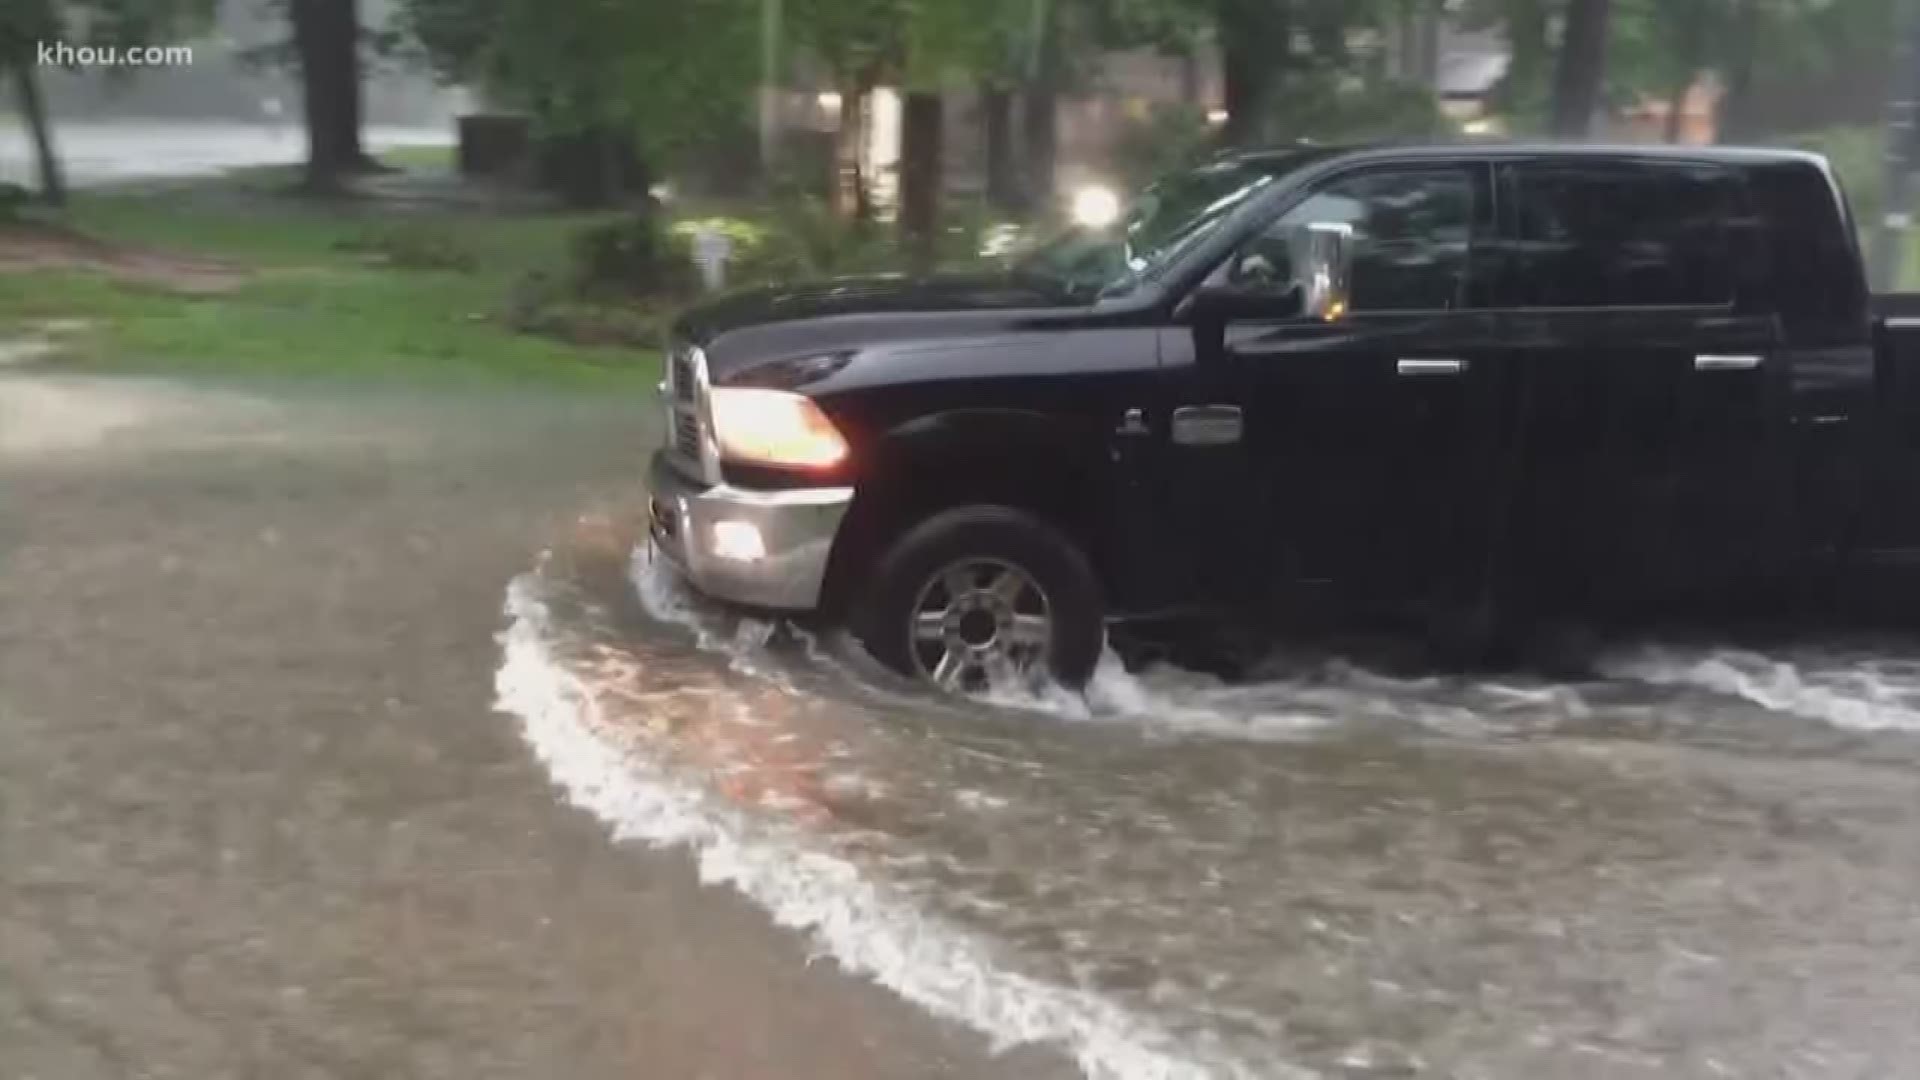 Heavy rain Tuesday afternoon caused flooding in some areas, including Kingwood and Spring, prompting flash flood and severe thunderstorm warnings.